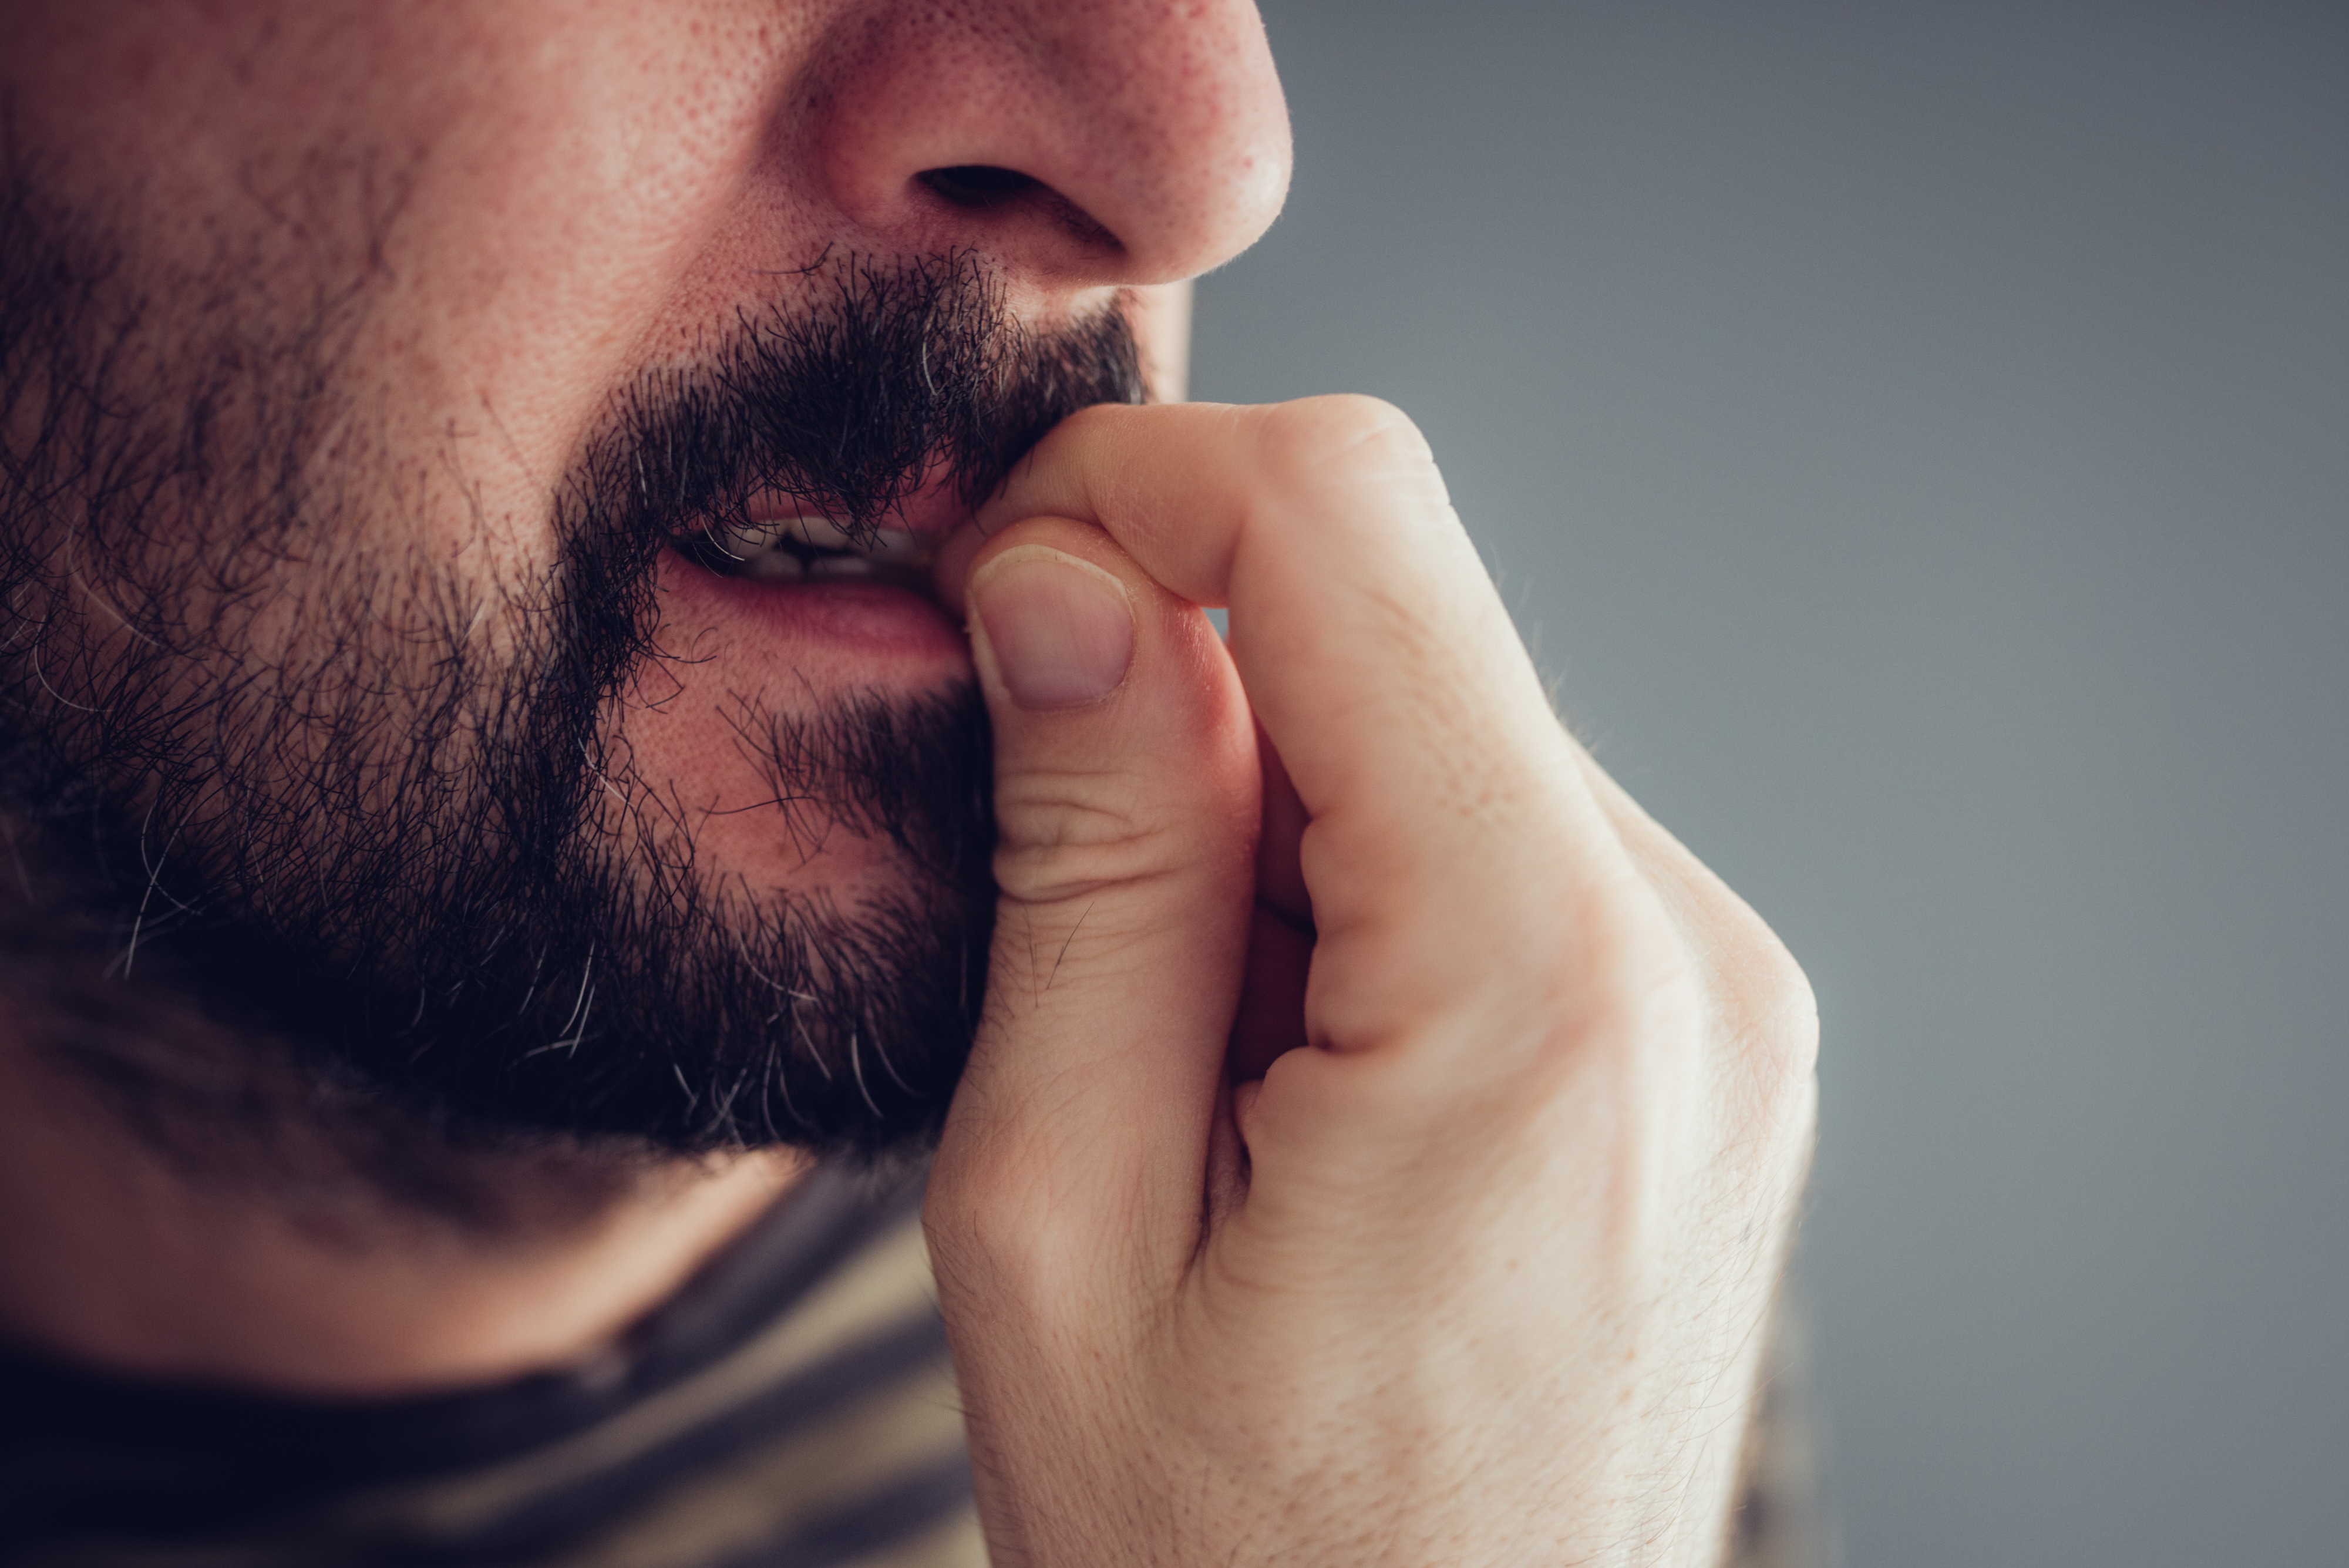 Person biting nails in a close-up, showing signs of anxiety or deep thought